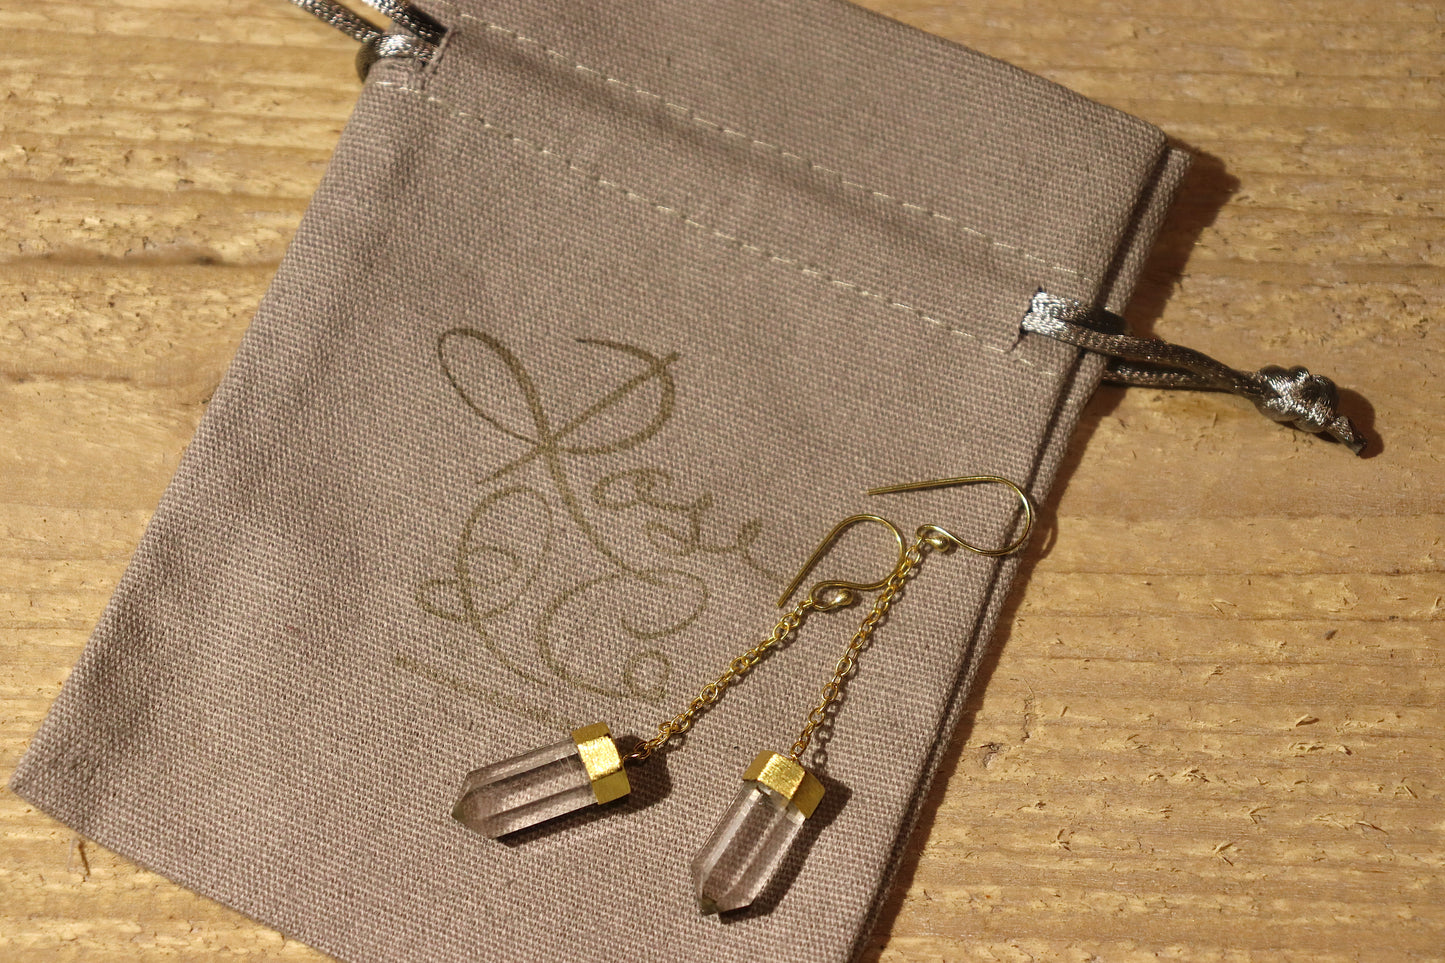 Gold plated clear quartz crystal points on a dangly chain, on a grey cotton drawstring bag with a gold Rose & Co logo stamped on it.